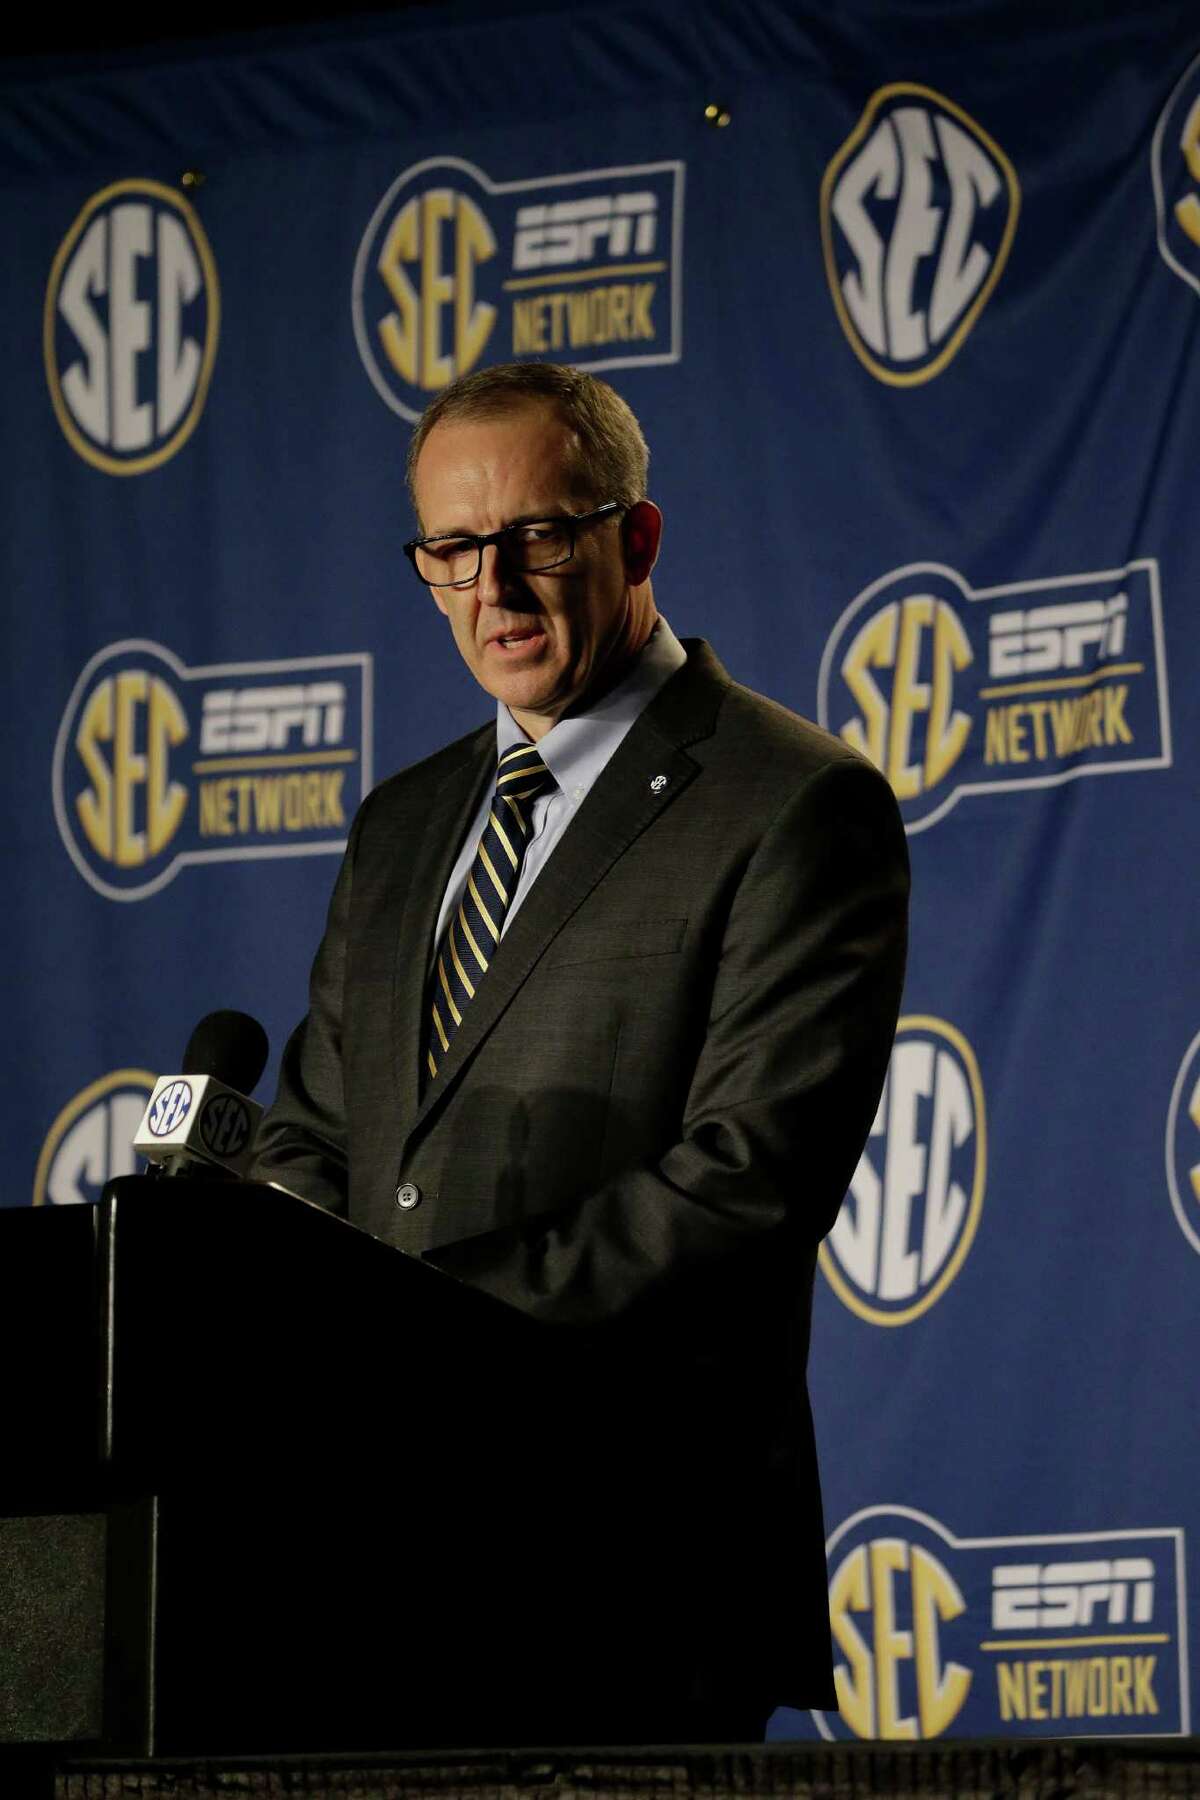 New SEC commissioner Greg Sankey speaks before a game in the quarterfinal round of the Southeastern Conference tournament.